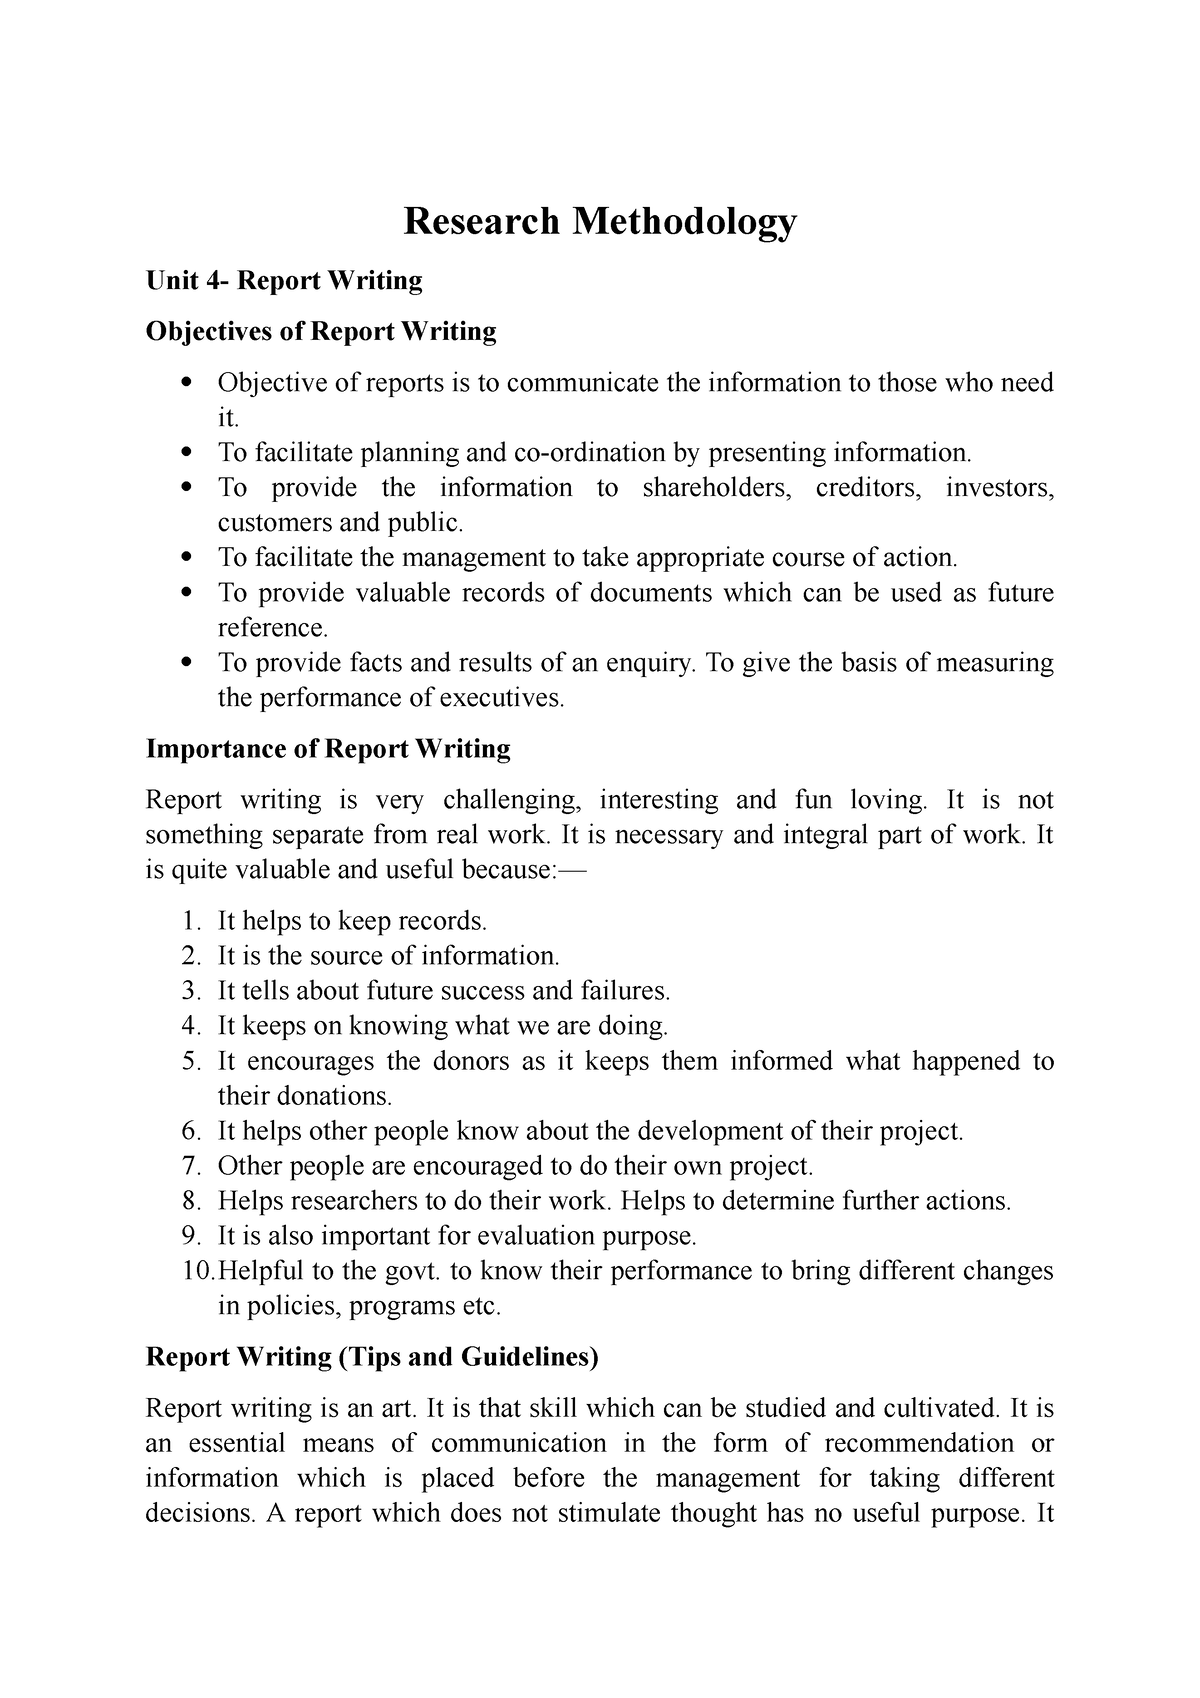 purpose of report writing in research methodology